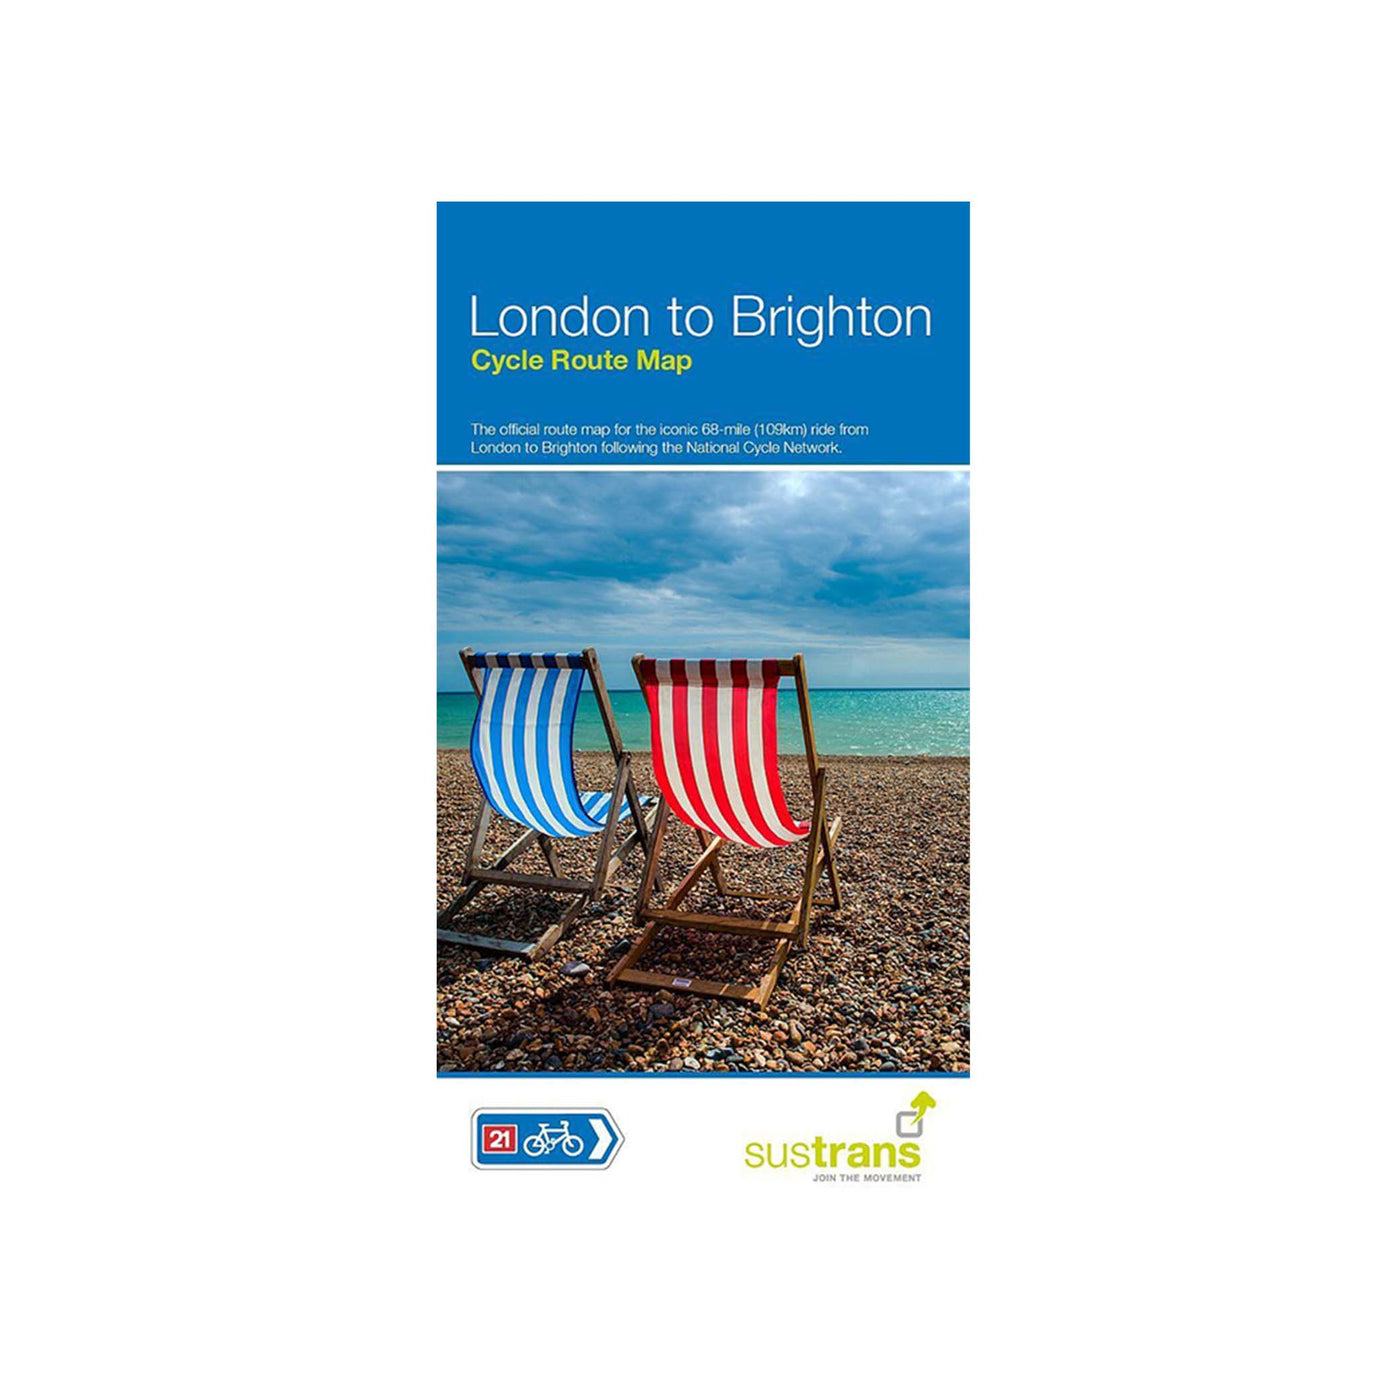 London to Brighton cycle route map